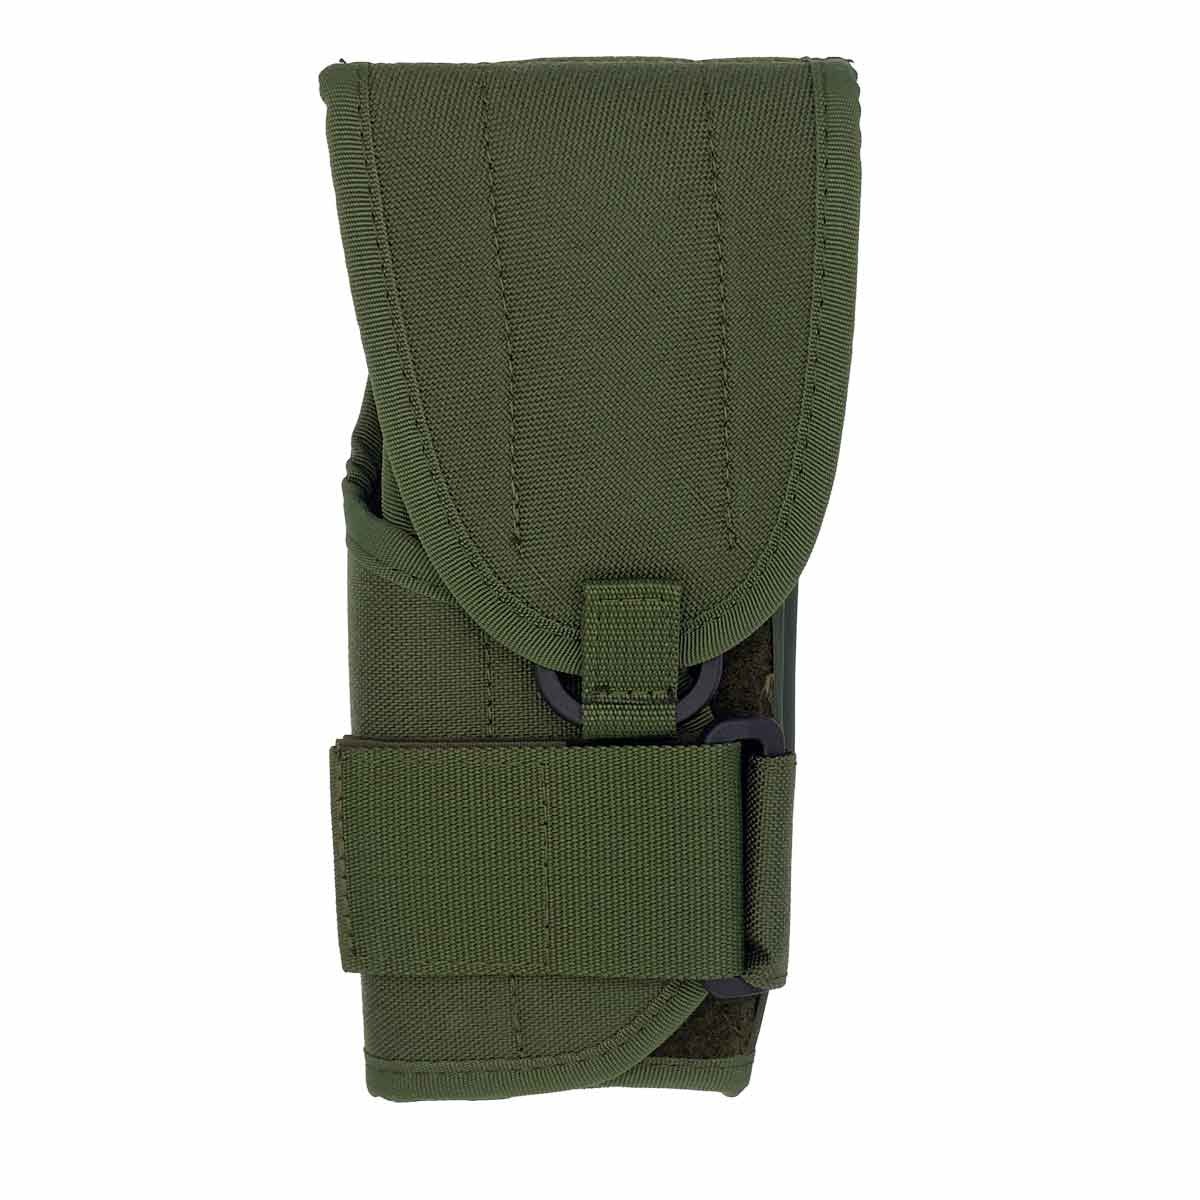 Adjustable cordura tactical holster Full Size L/Auto up...